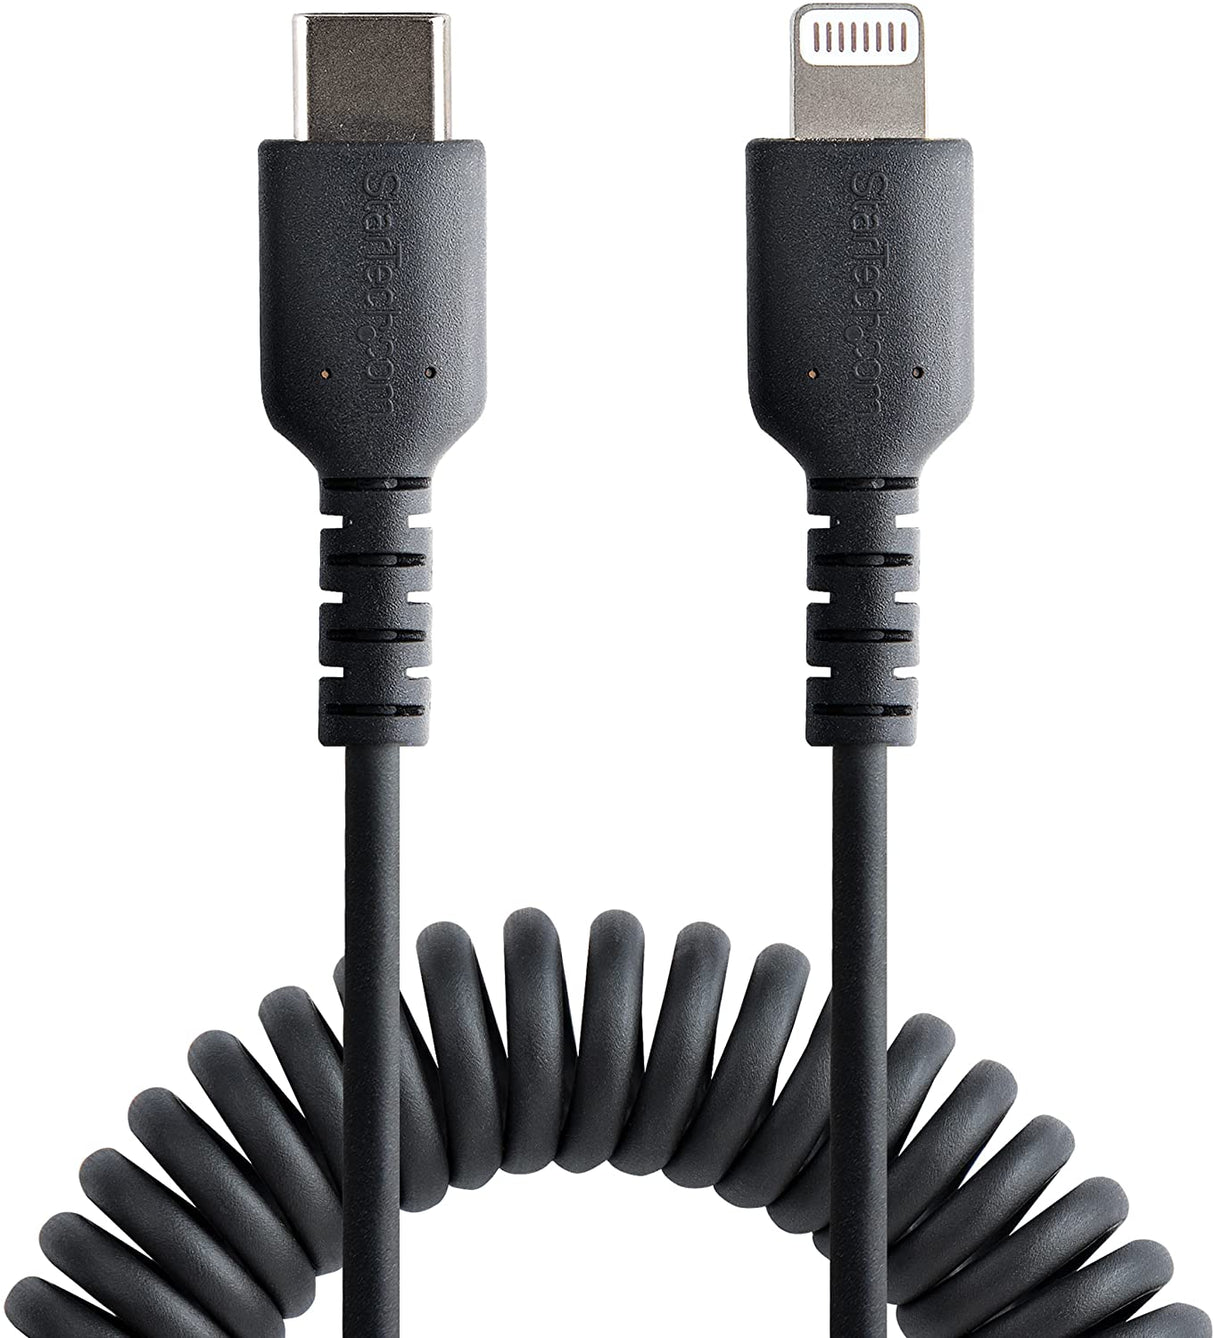 StarTech.com 20in / 50cm USB C to Lightning Cable, MFi Certified, Coiled iPhone Charger Cable, Black, Durable TPE Jacket Aramid Fiber, Heavy Duty Coil Lightning Cable (RUSB2CLT50CMBC) 50cm / 20 in USB-C